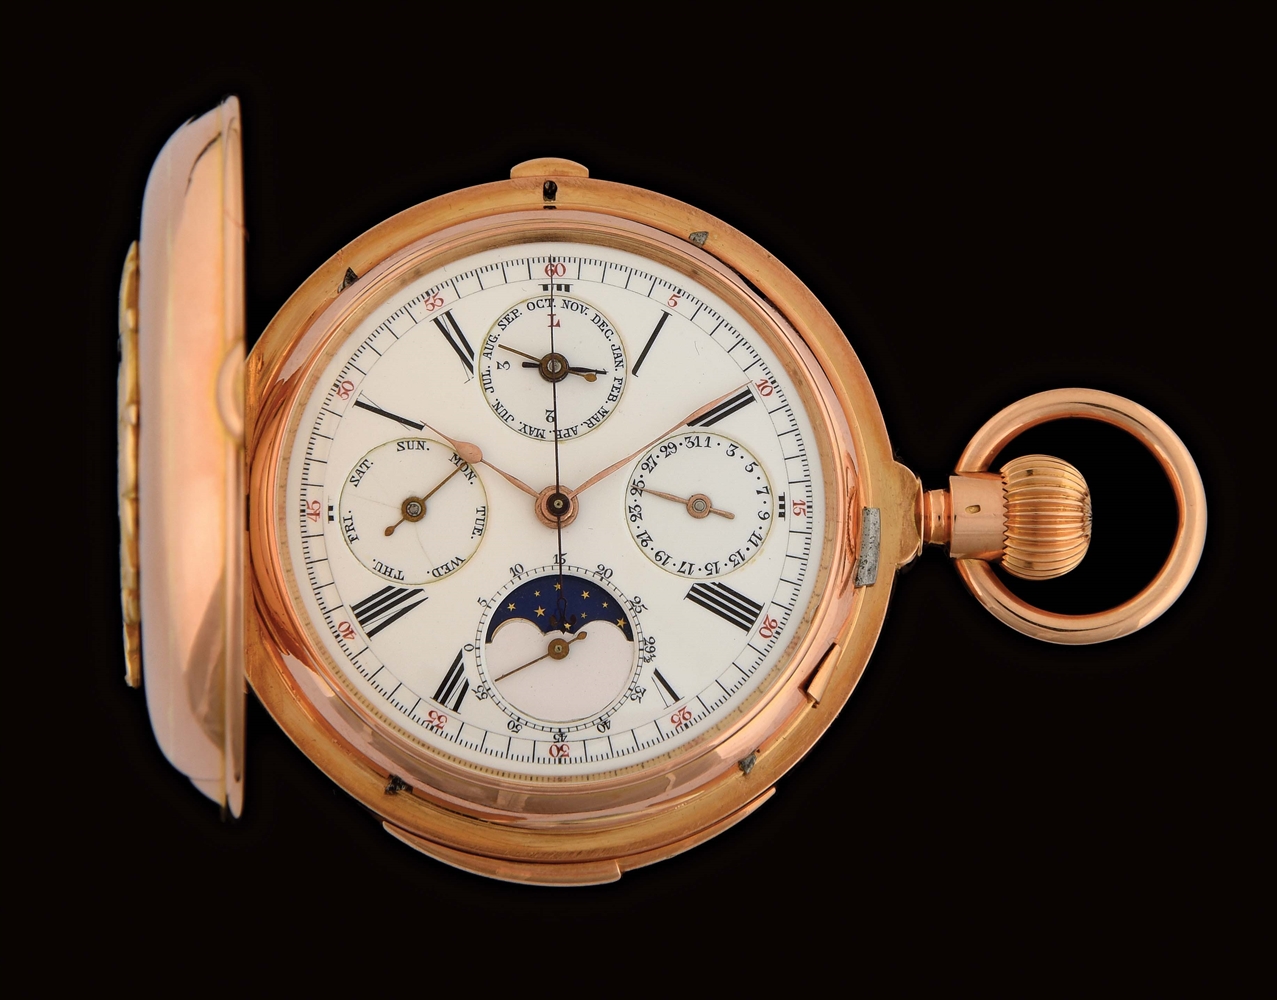 18K PINK GOLD H. REDARD GRAND COMPLICATIONS MINUTE REPEATING H/C POCKET WATCH W/LEAP YEAR CALENDAR & MOON PHASES